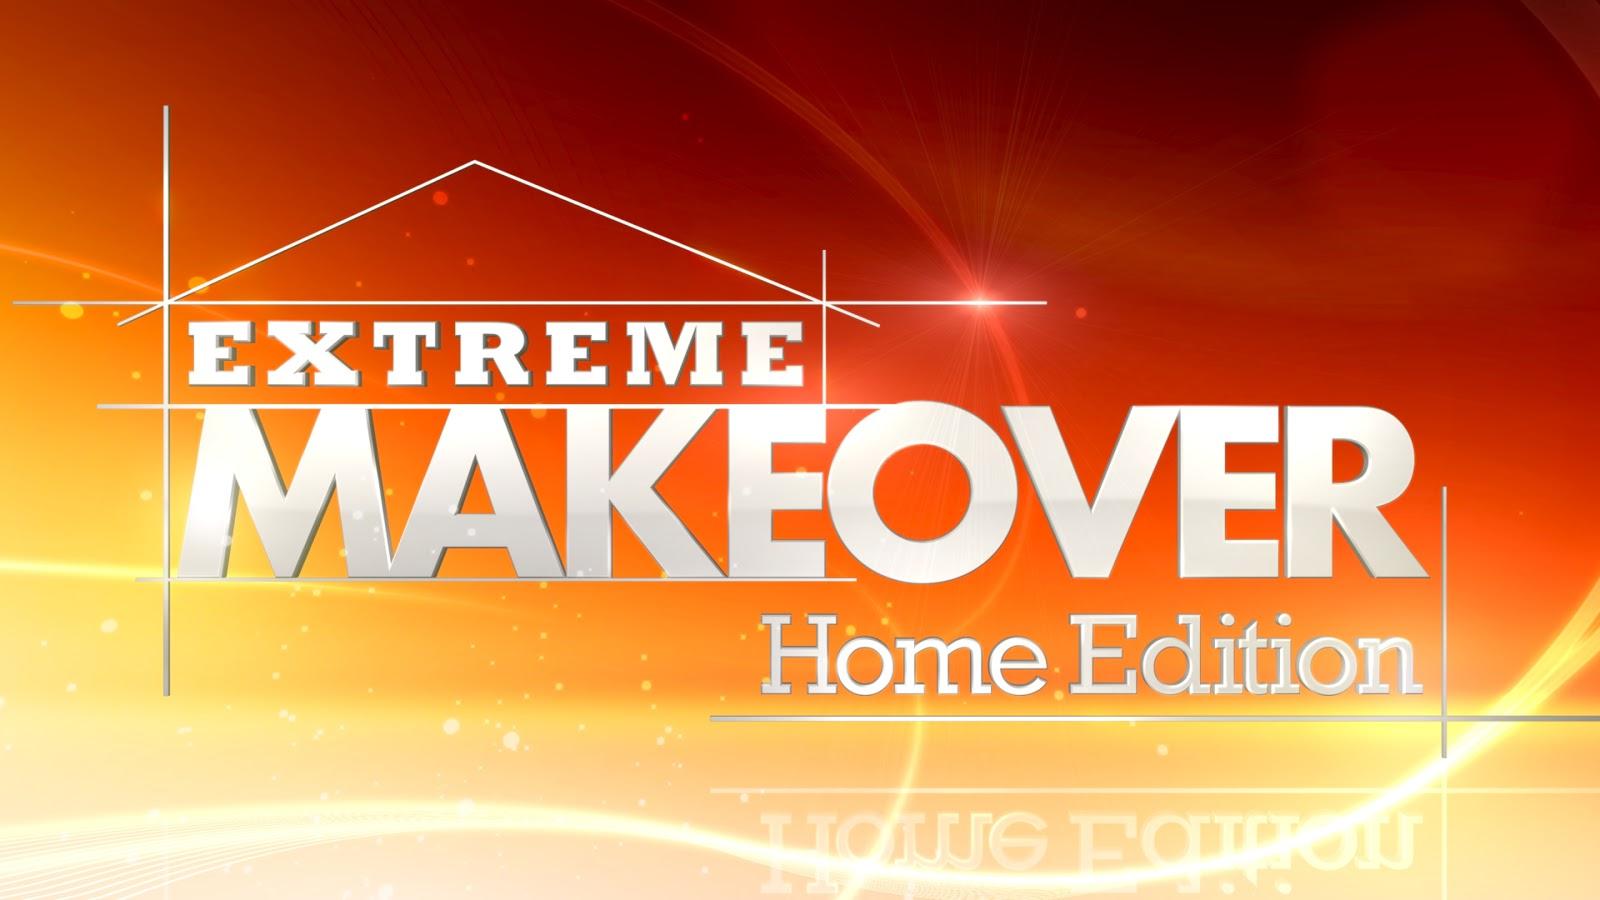 extreme makeover home edition the design team comes to a home when it still dark outside